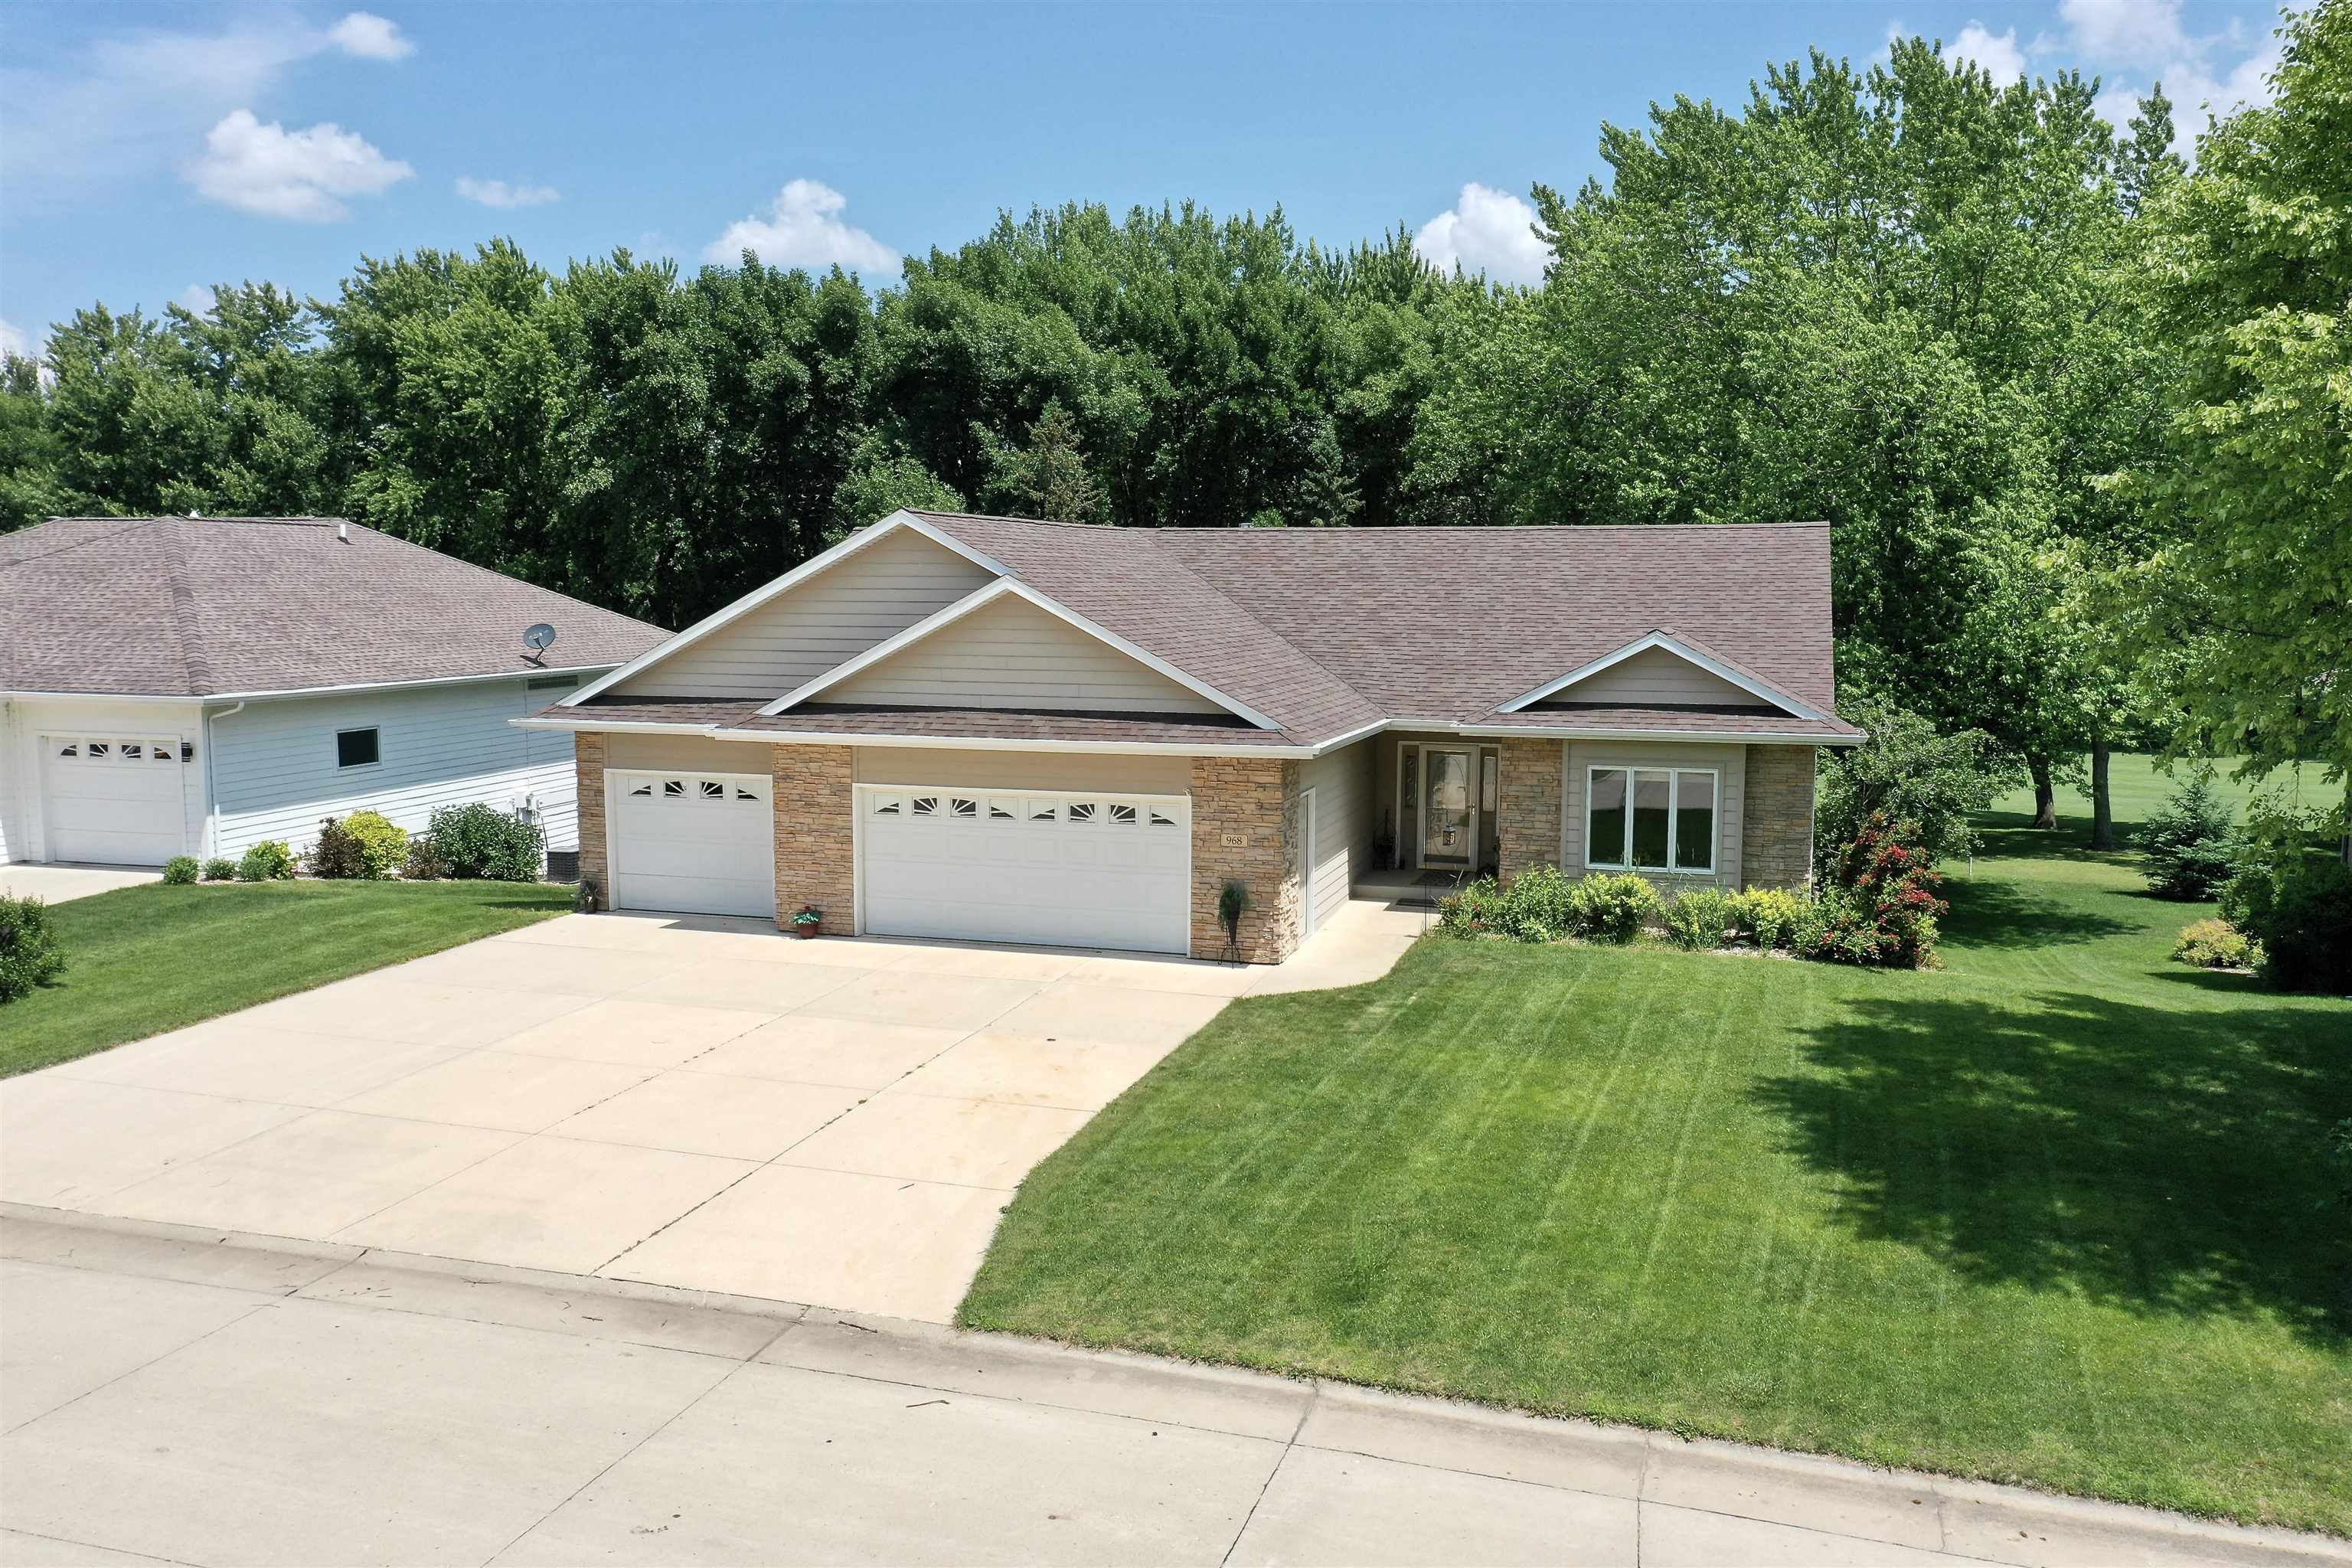 968 Emerald Pines Drive, Arnolds Park, IA 51331 